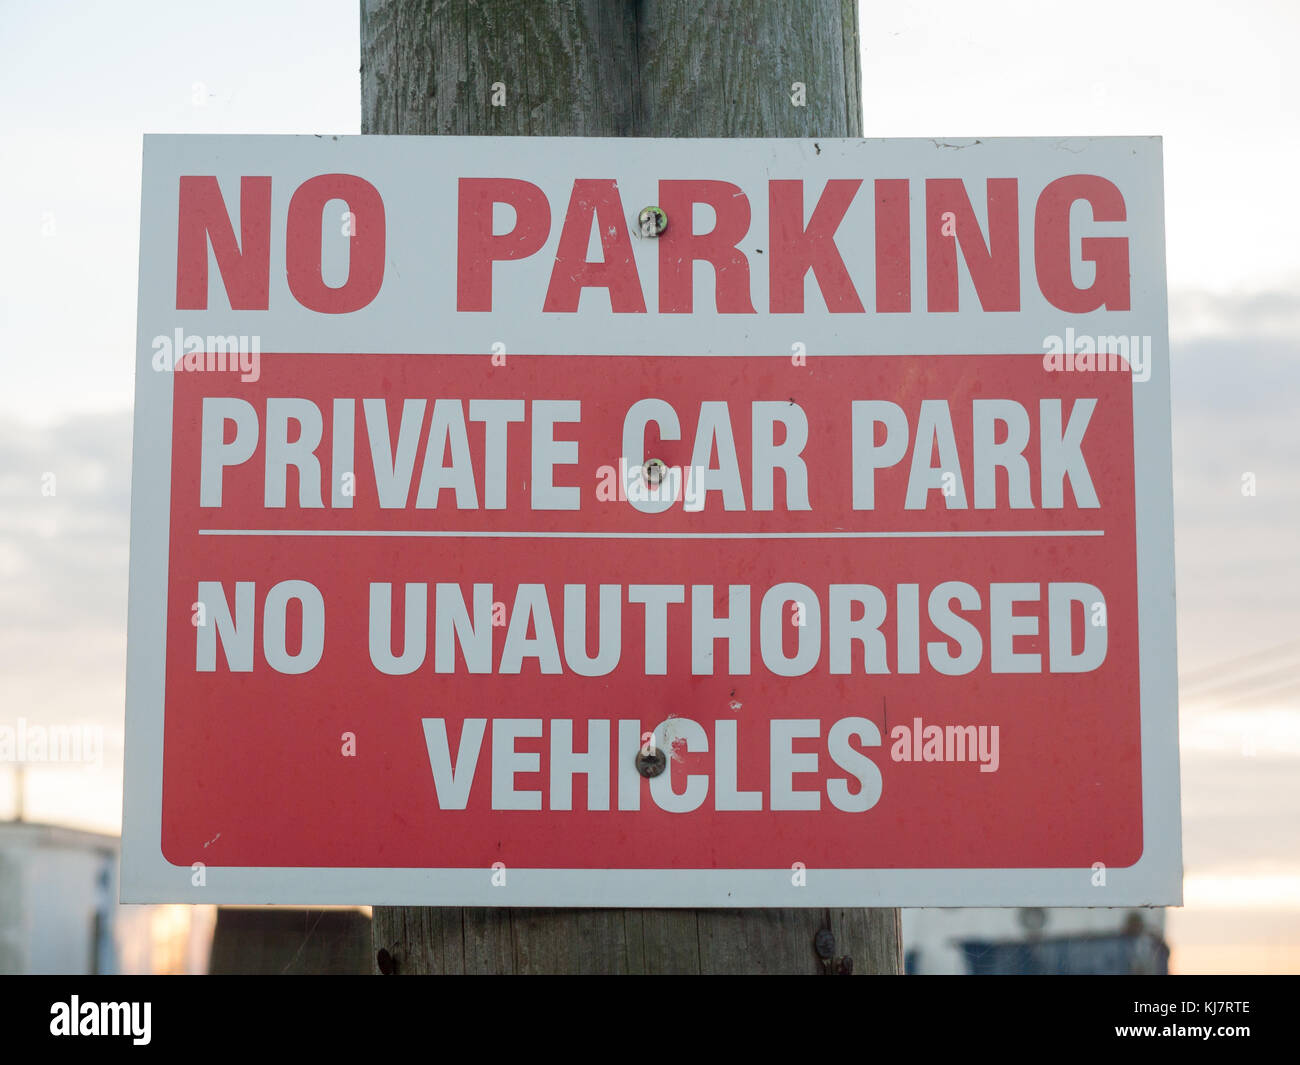 Private car park no unauthorised parking safety sign